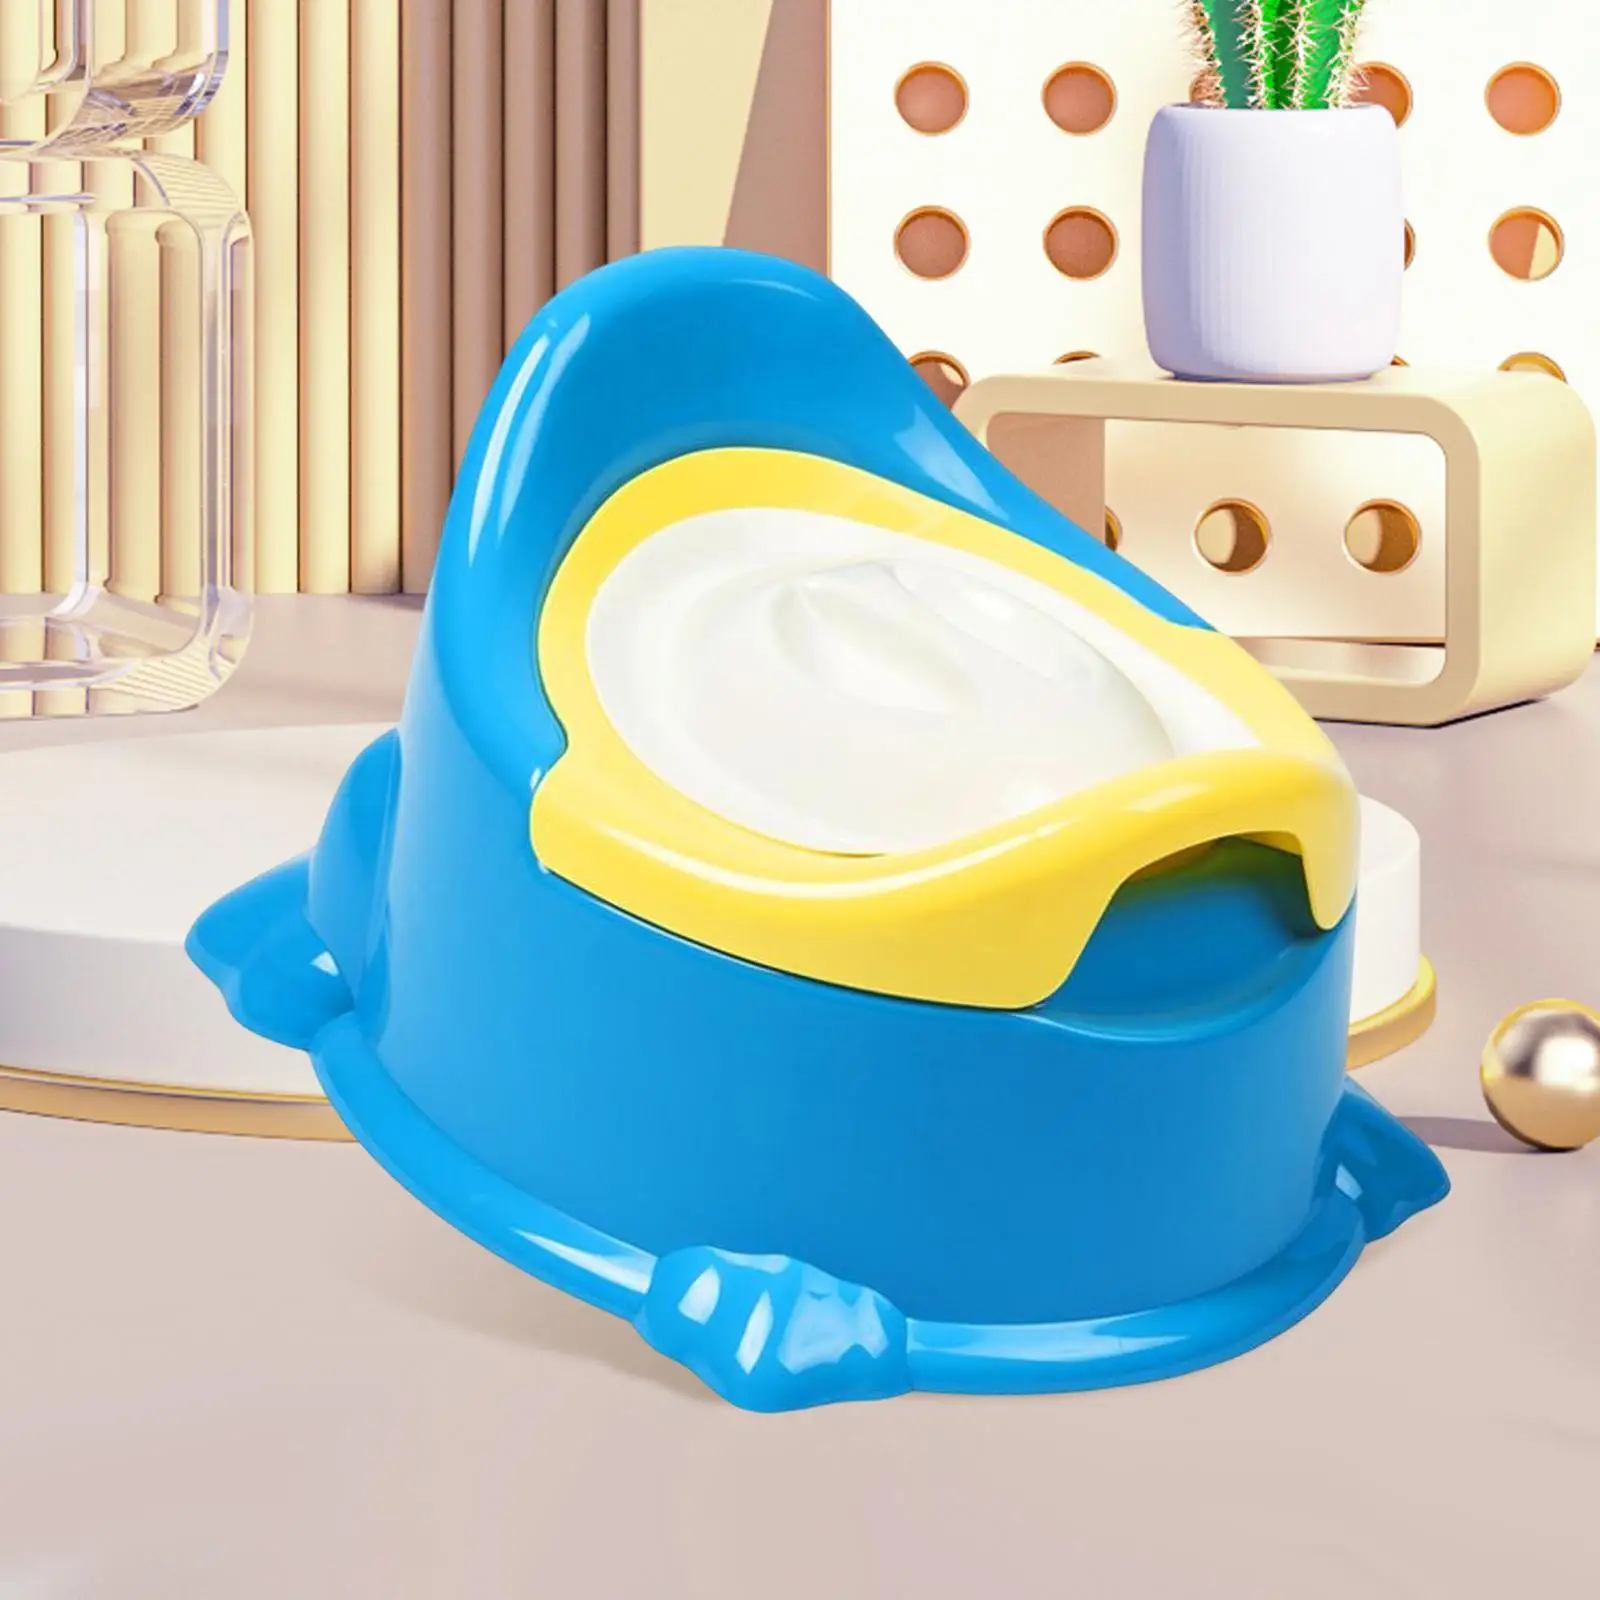 Baby Potty Chair Toilet Training Seat for Babies 6-12 Month Bedroom Home